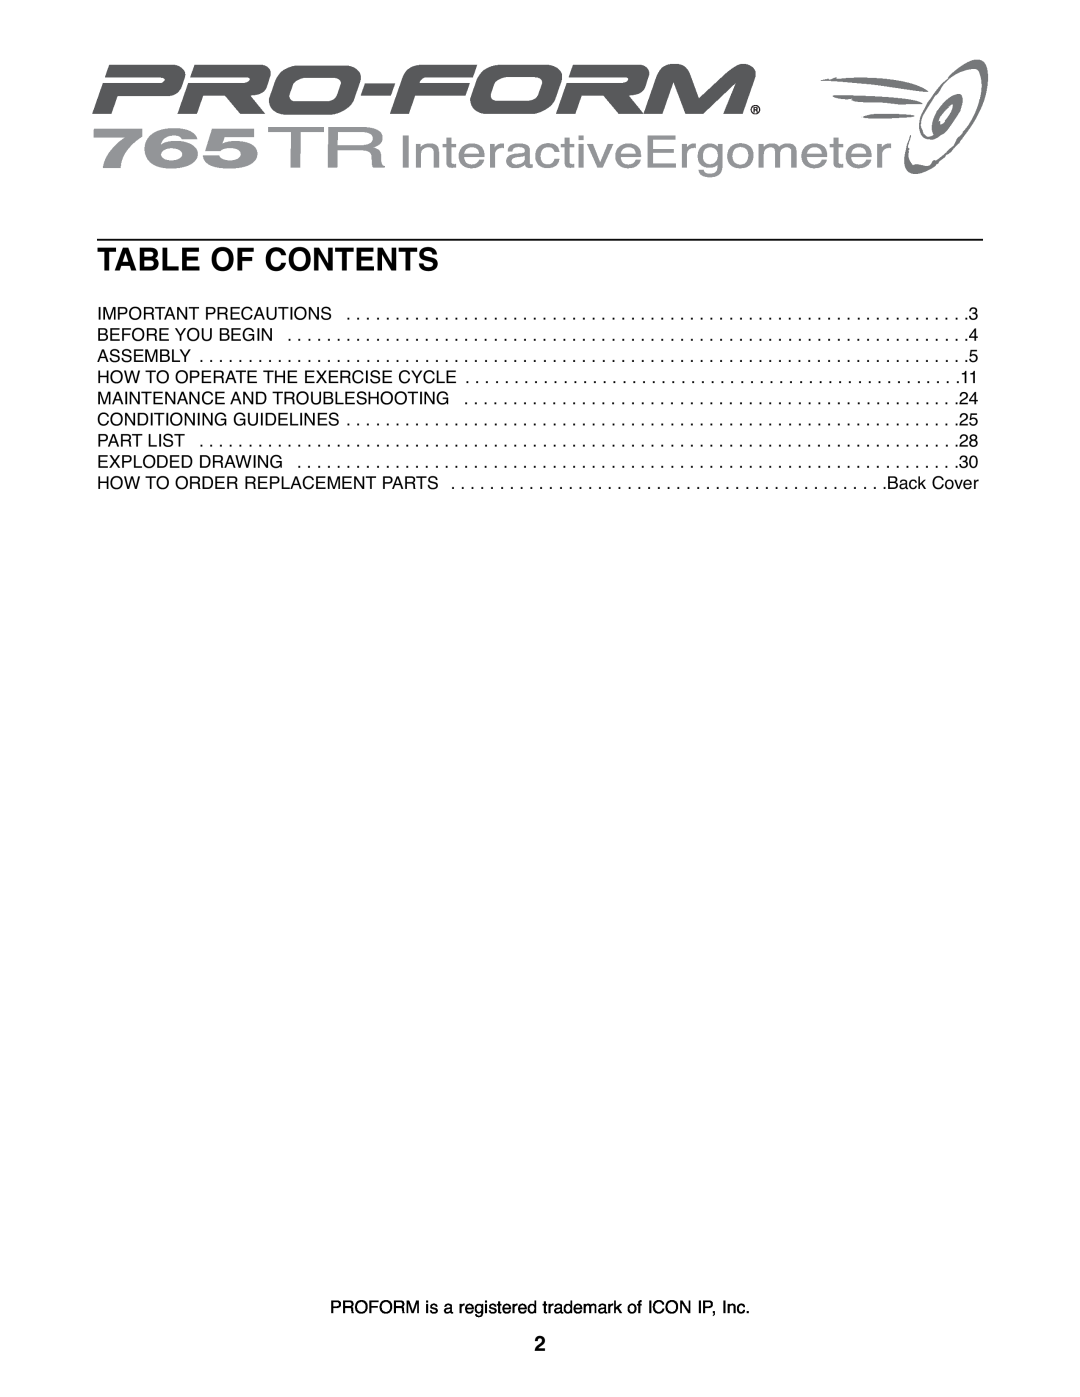 ProForm PFEVEX62832 user manual Table Of Contents, PROFORM is a registered trademark of ICON IP, Inc 